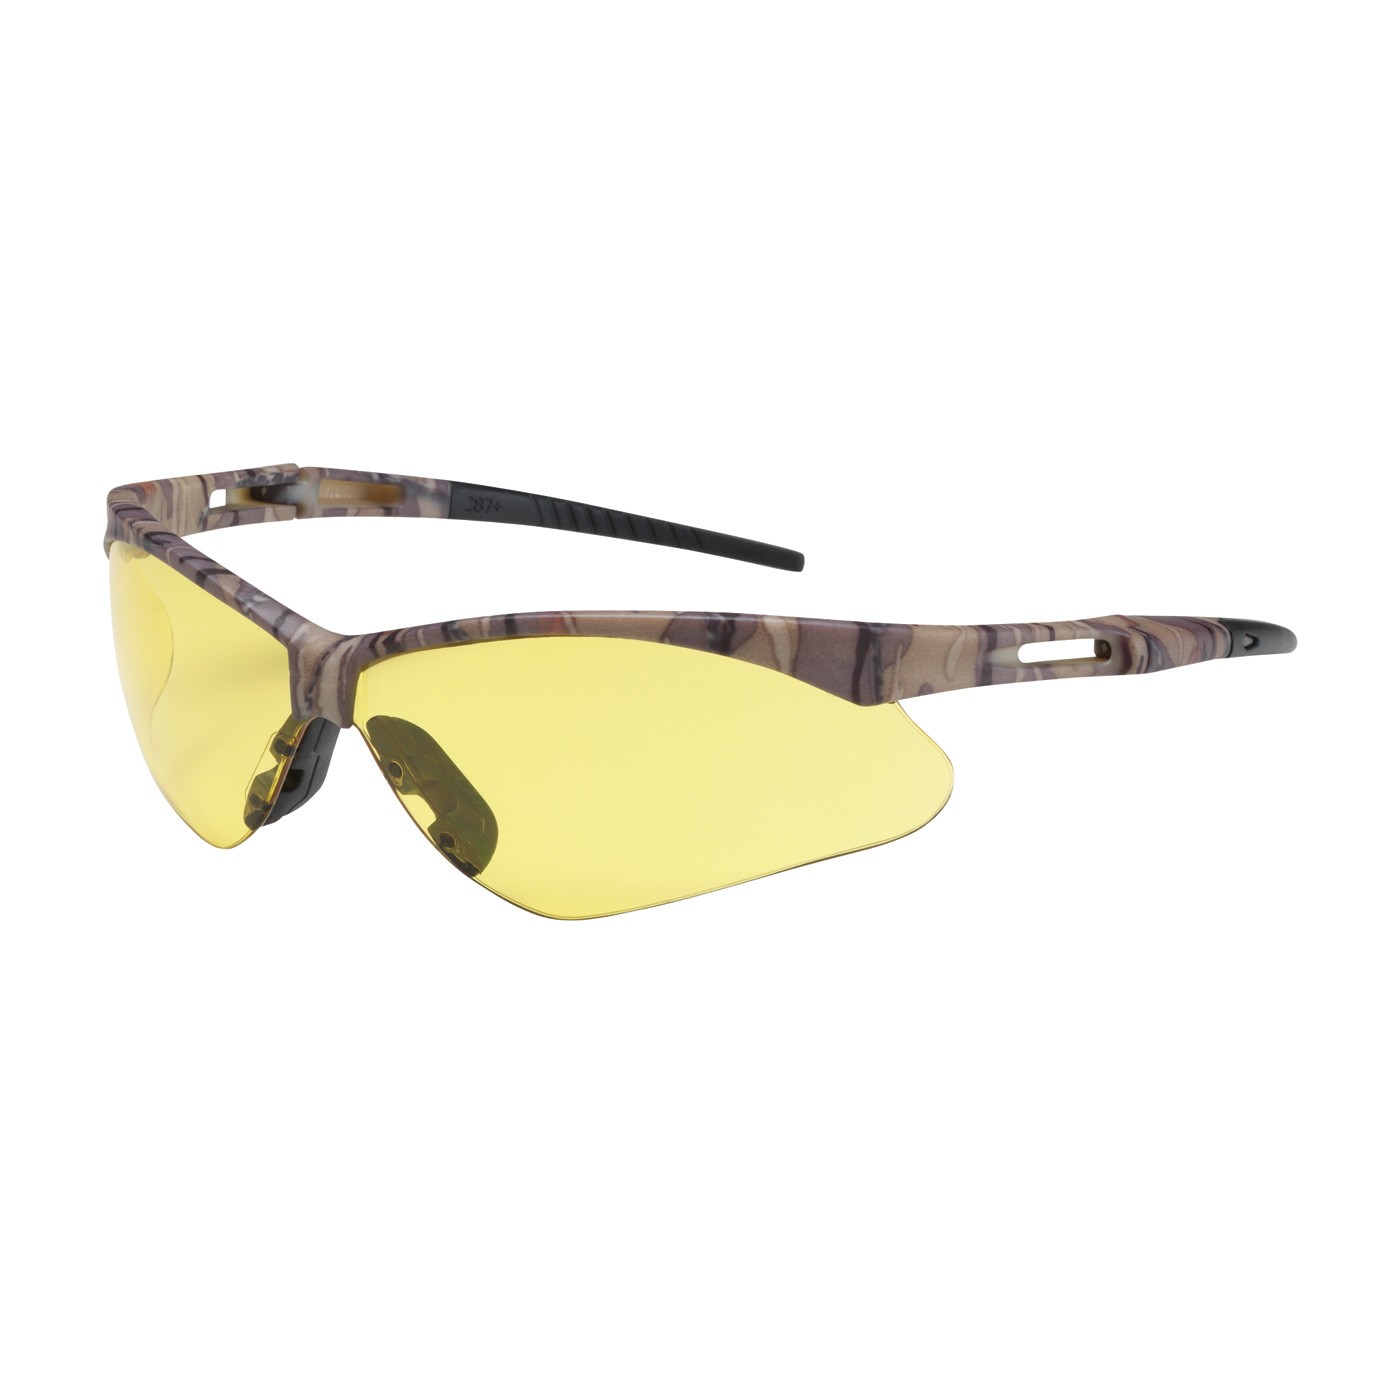 Anser™ Semi-Rimless Safety Glasses with Camouflage Frame, Amber Lens and Anti-Scratch Coating  (#250-AN-10122)